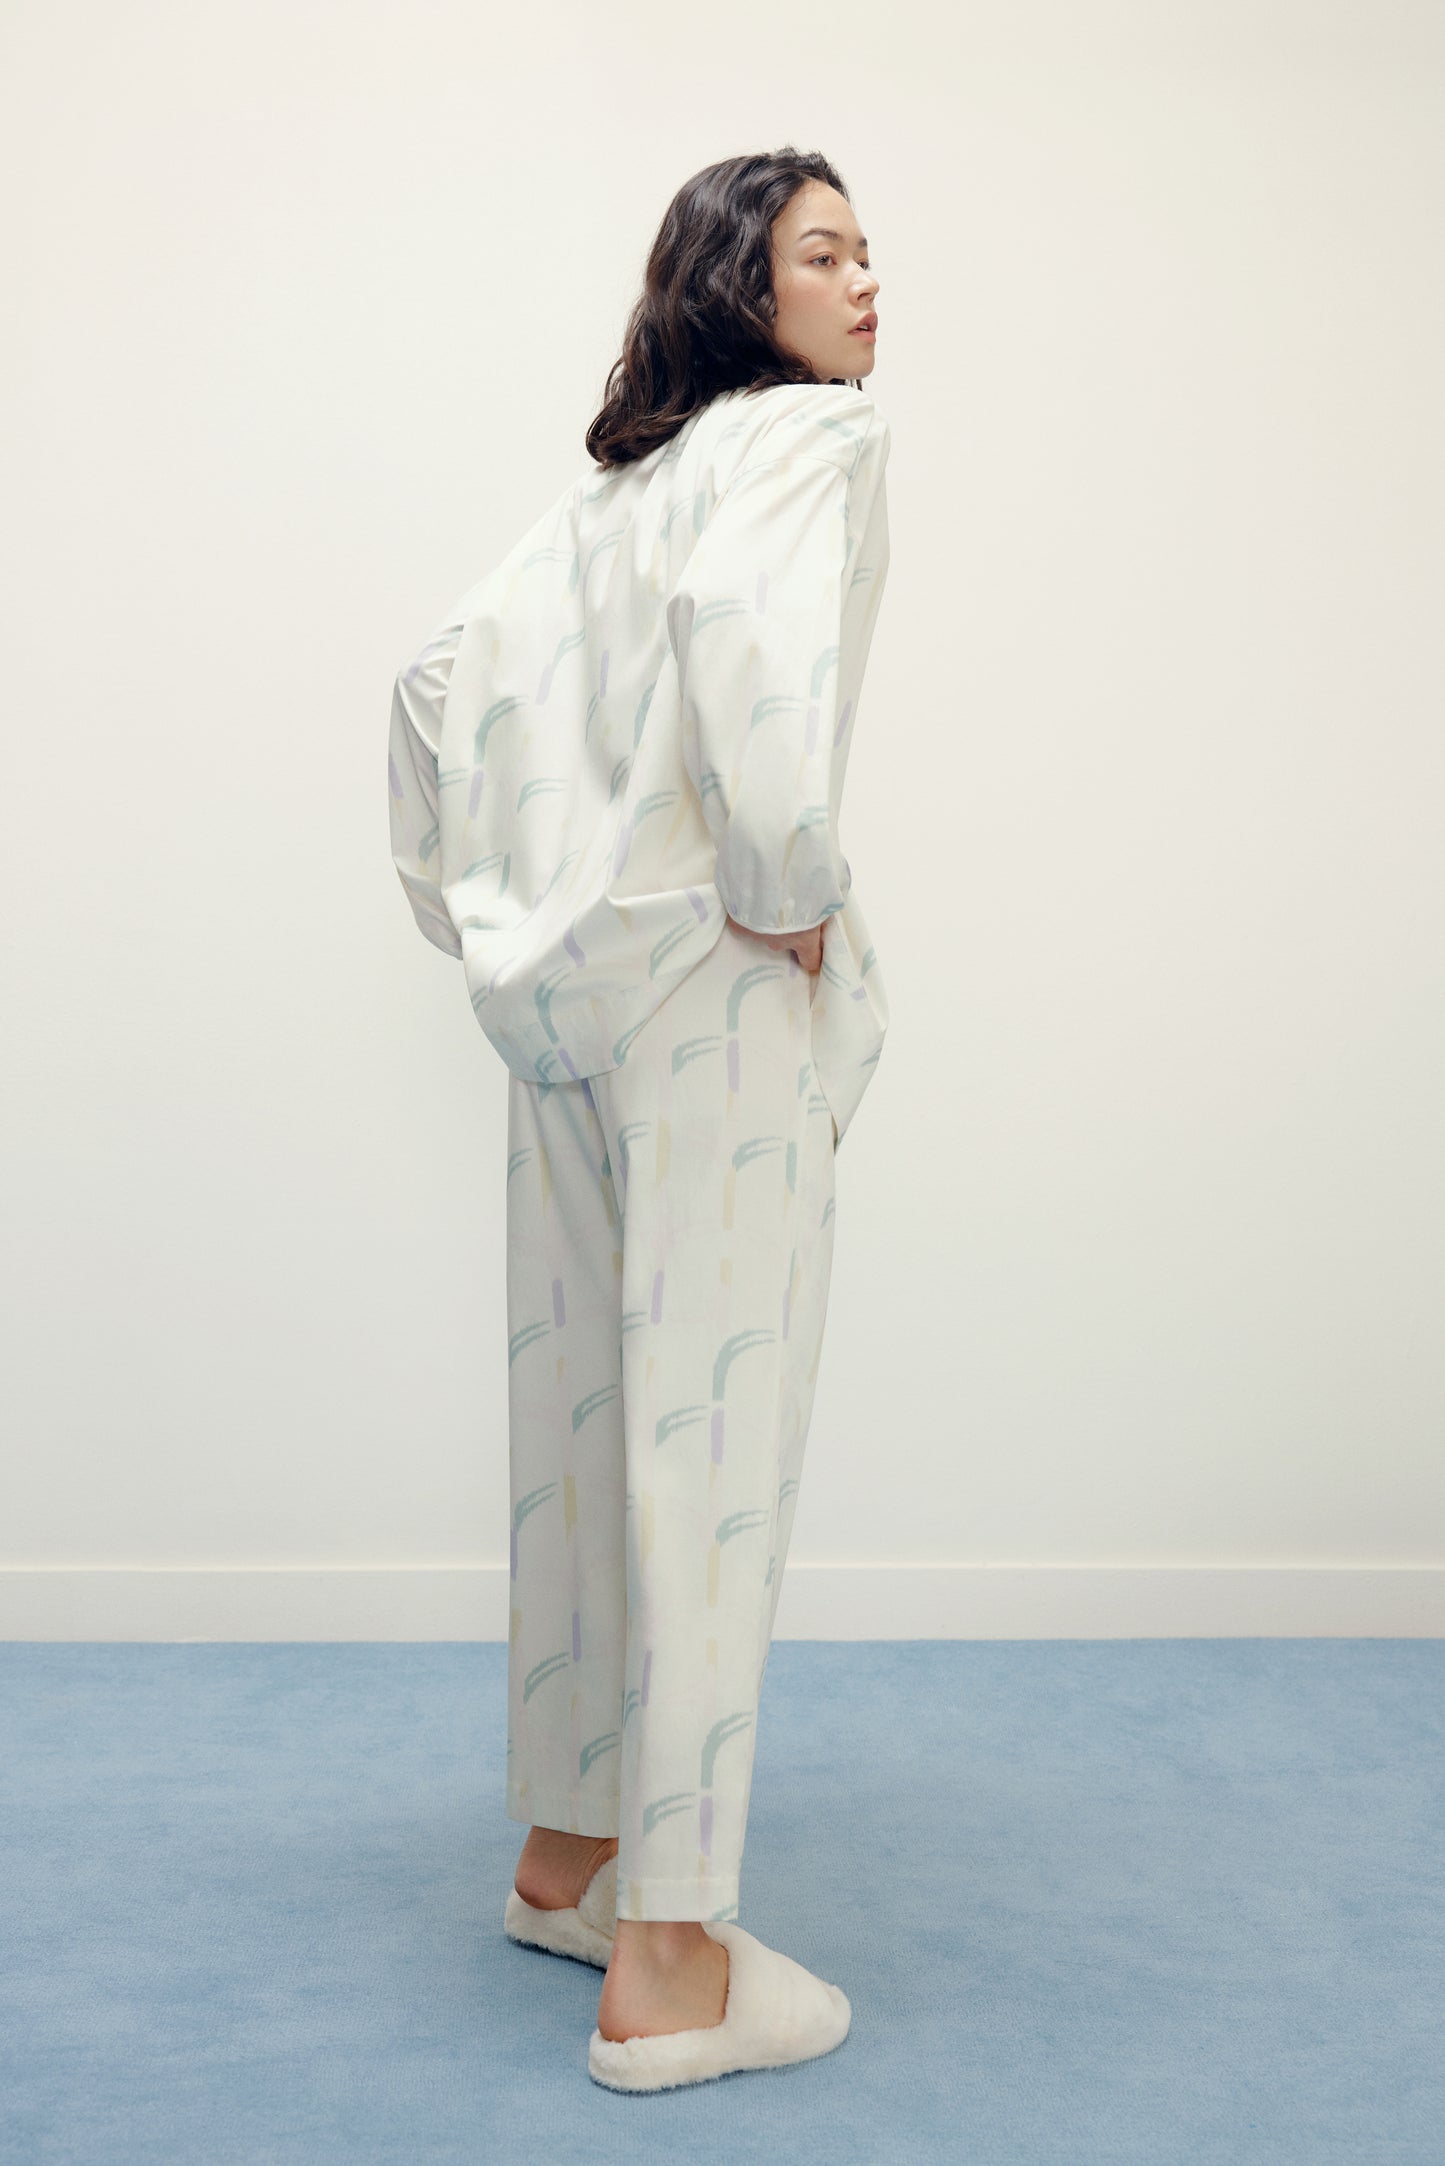 back of a woman wearing a white pajama sets with pattern and white slippers